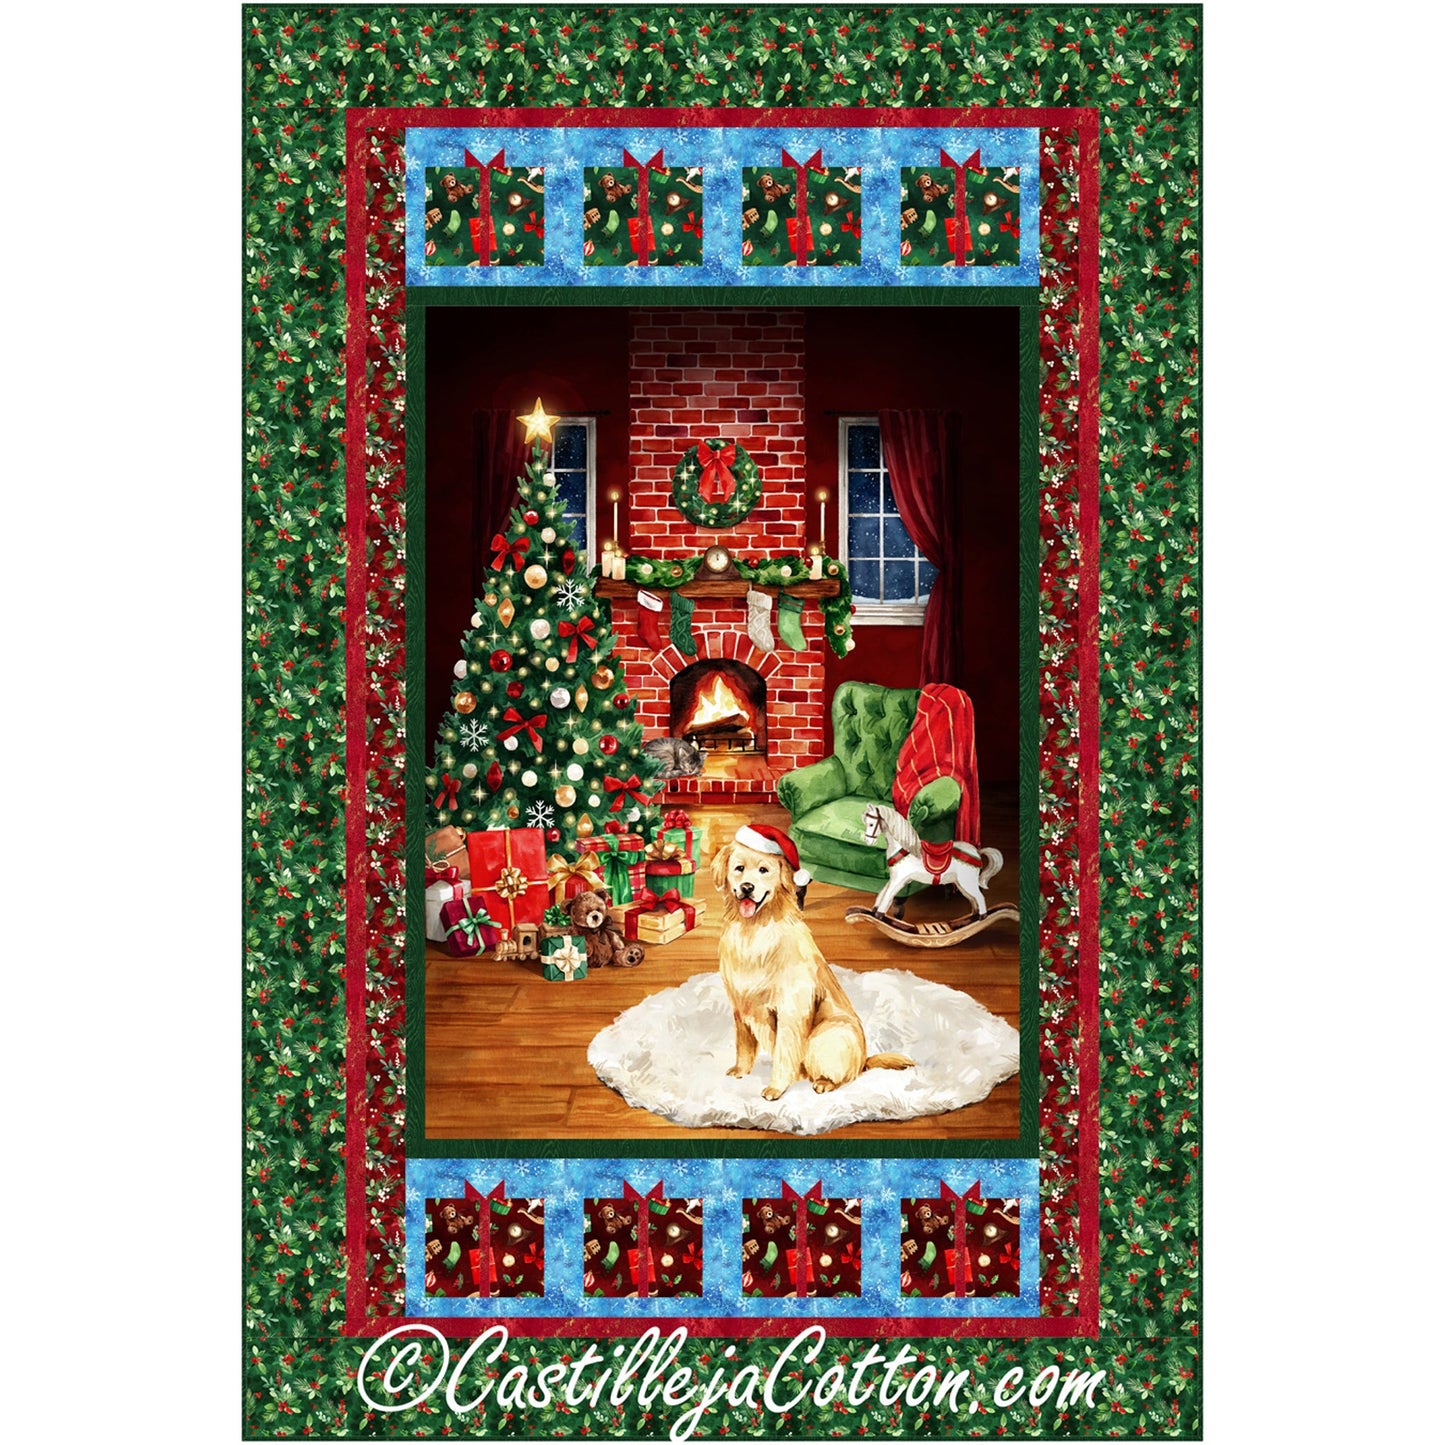 A festive quilt with print that includes a Christmas tree and a dog sitting in front of a fireplace with top and bottom border that includes presents.